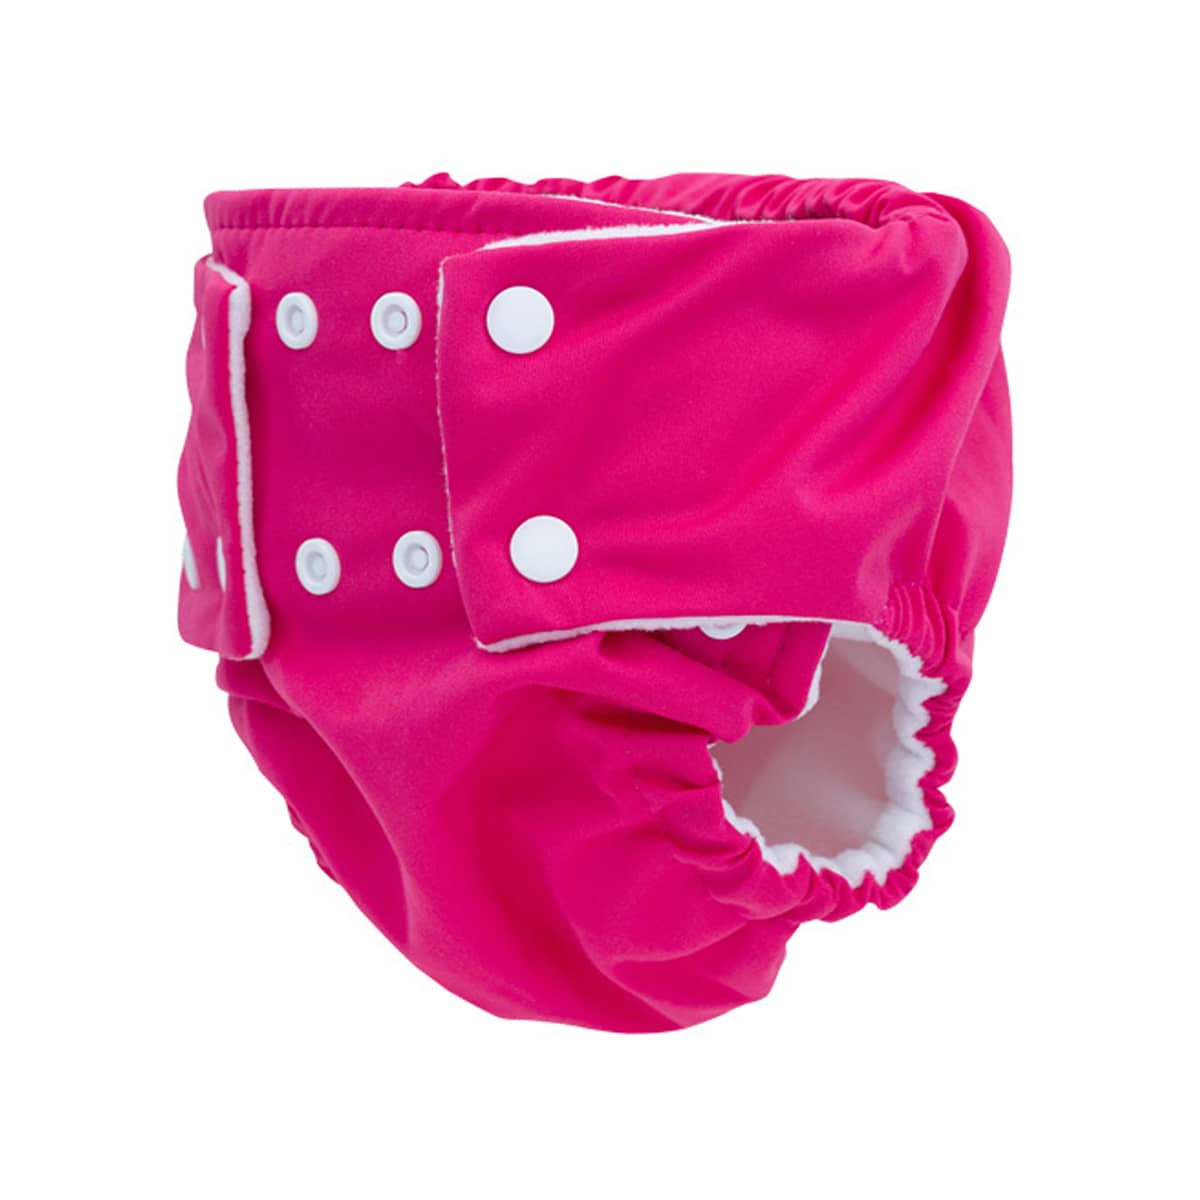 Pea Pods One Size Reusable Nappy - Hot Pink